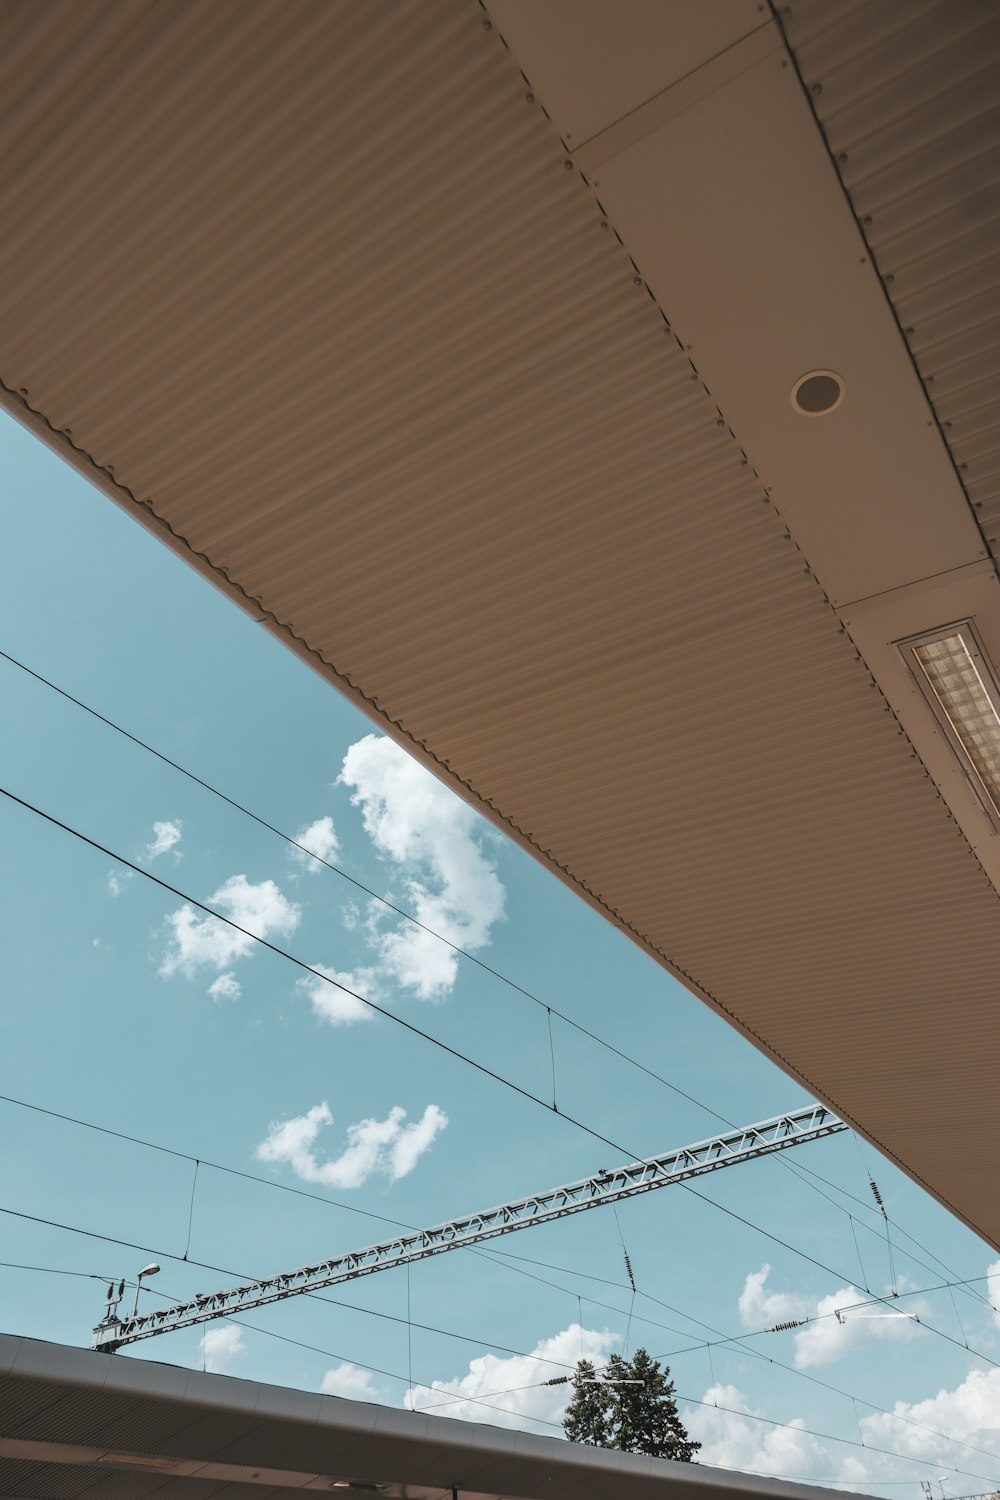 a view of the sky from underneath a building